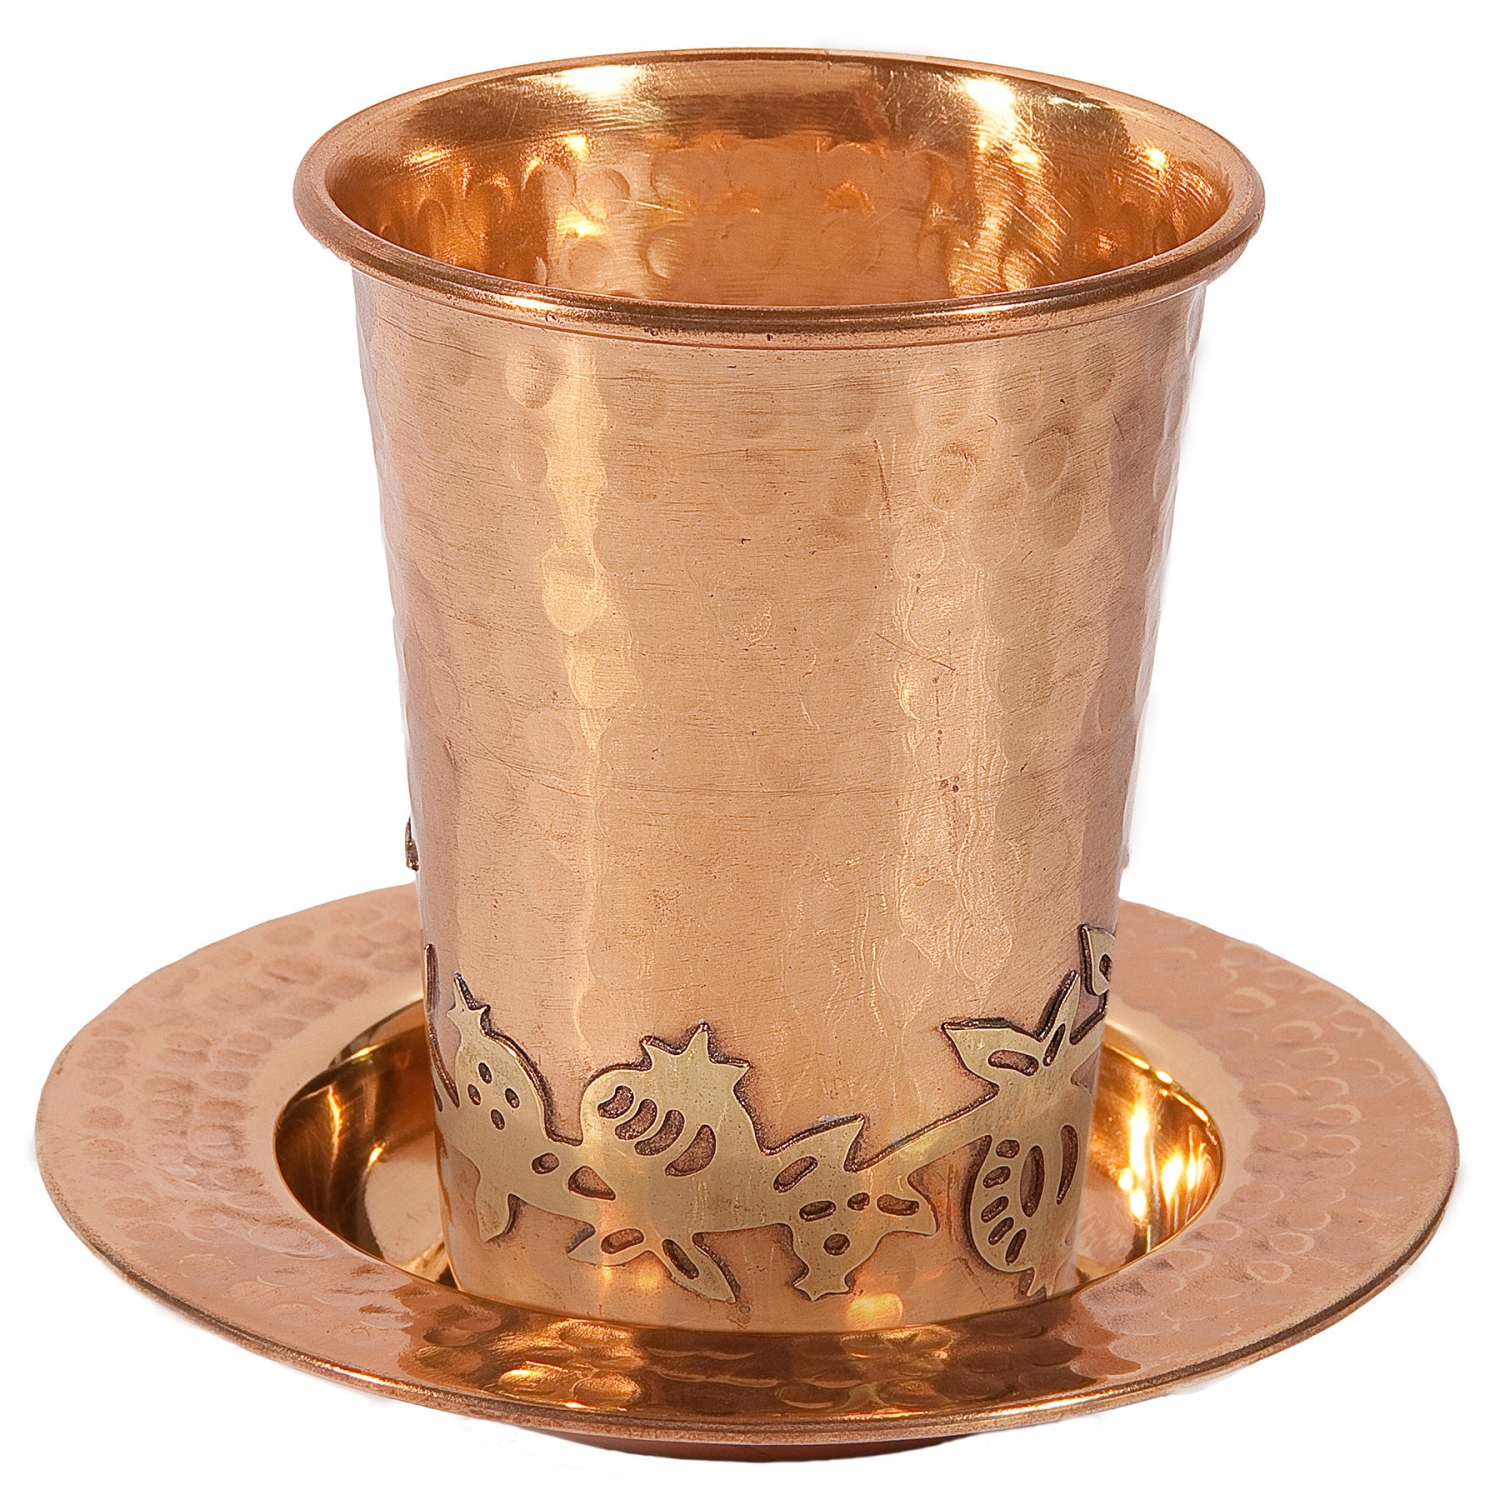 Yair Emanuel Copper Hammered Kiddush Cup and Plate - Pomegranates - 1